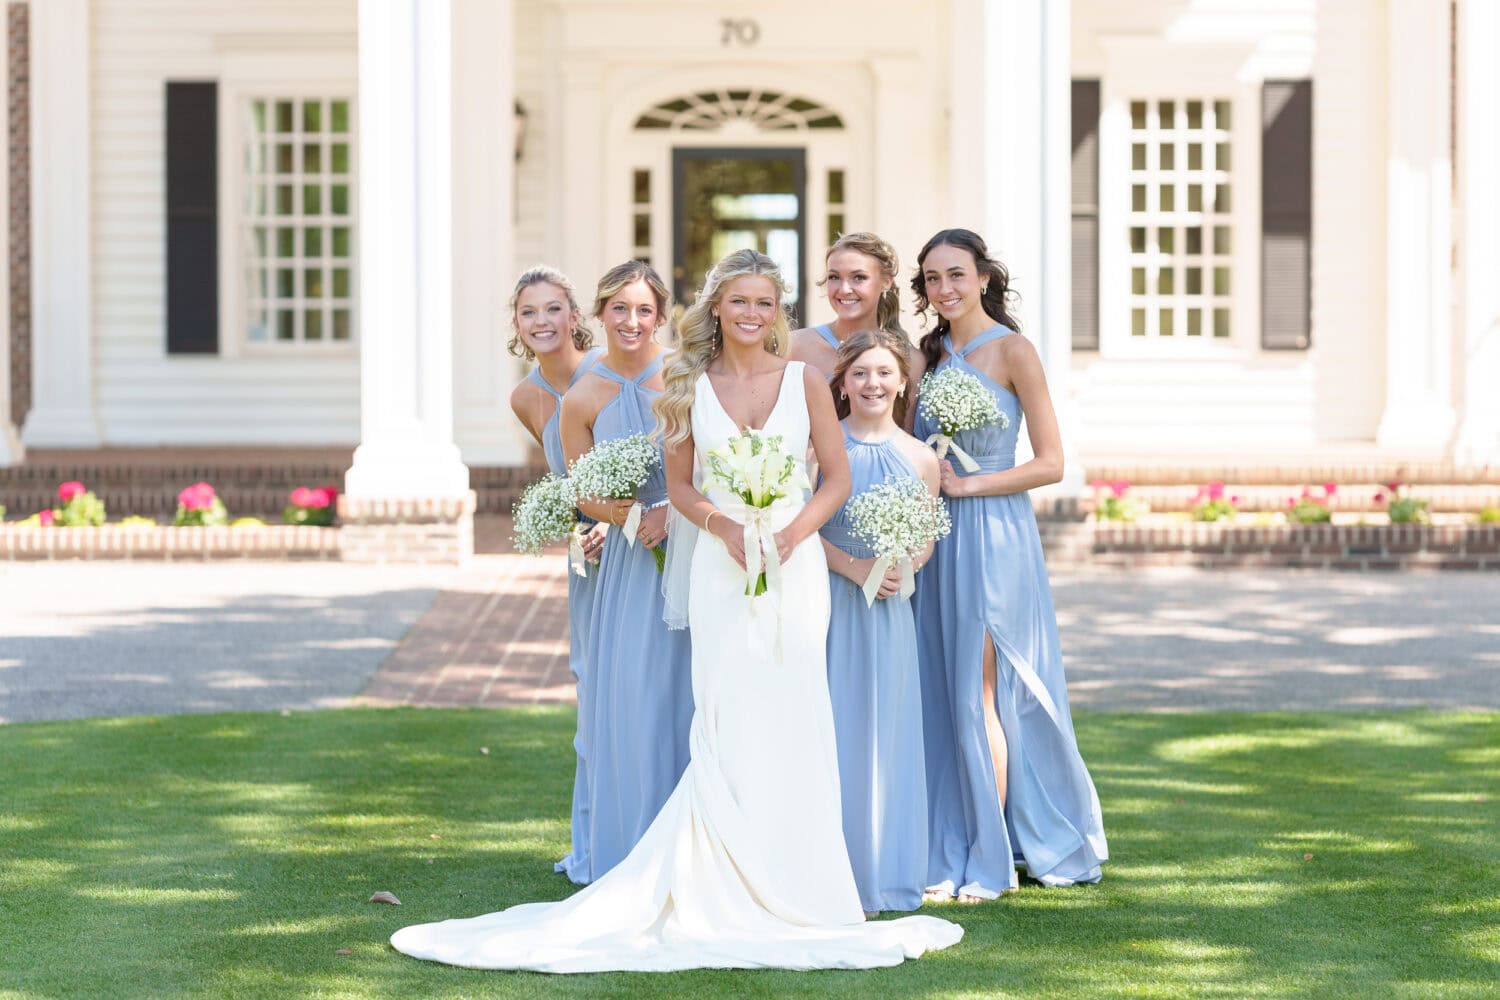 Pictures with the bride and bridesmaids in front of the clubhouse - Pawleys Plantation